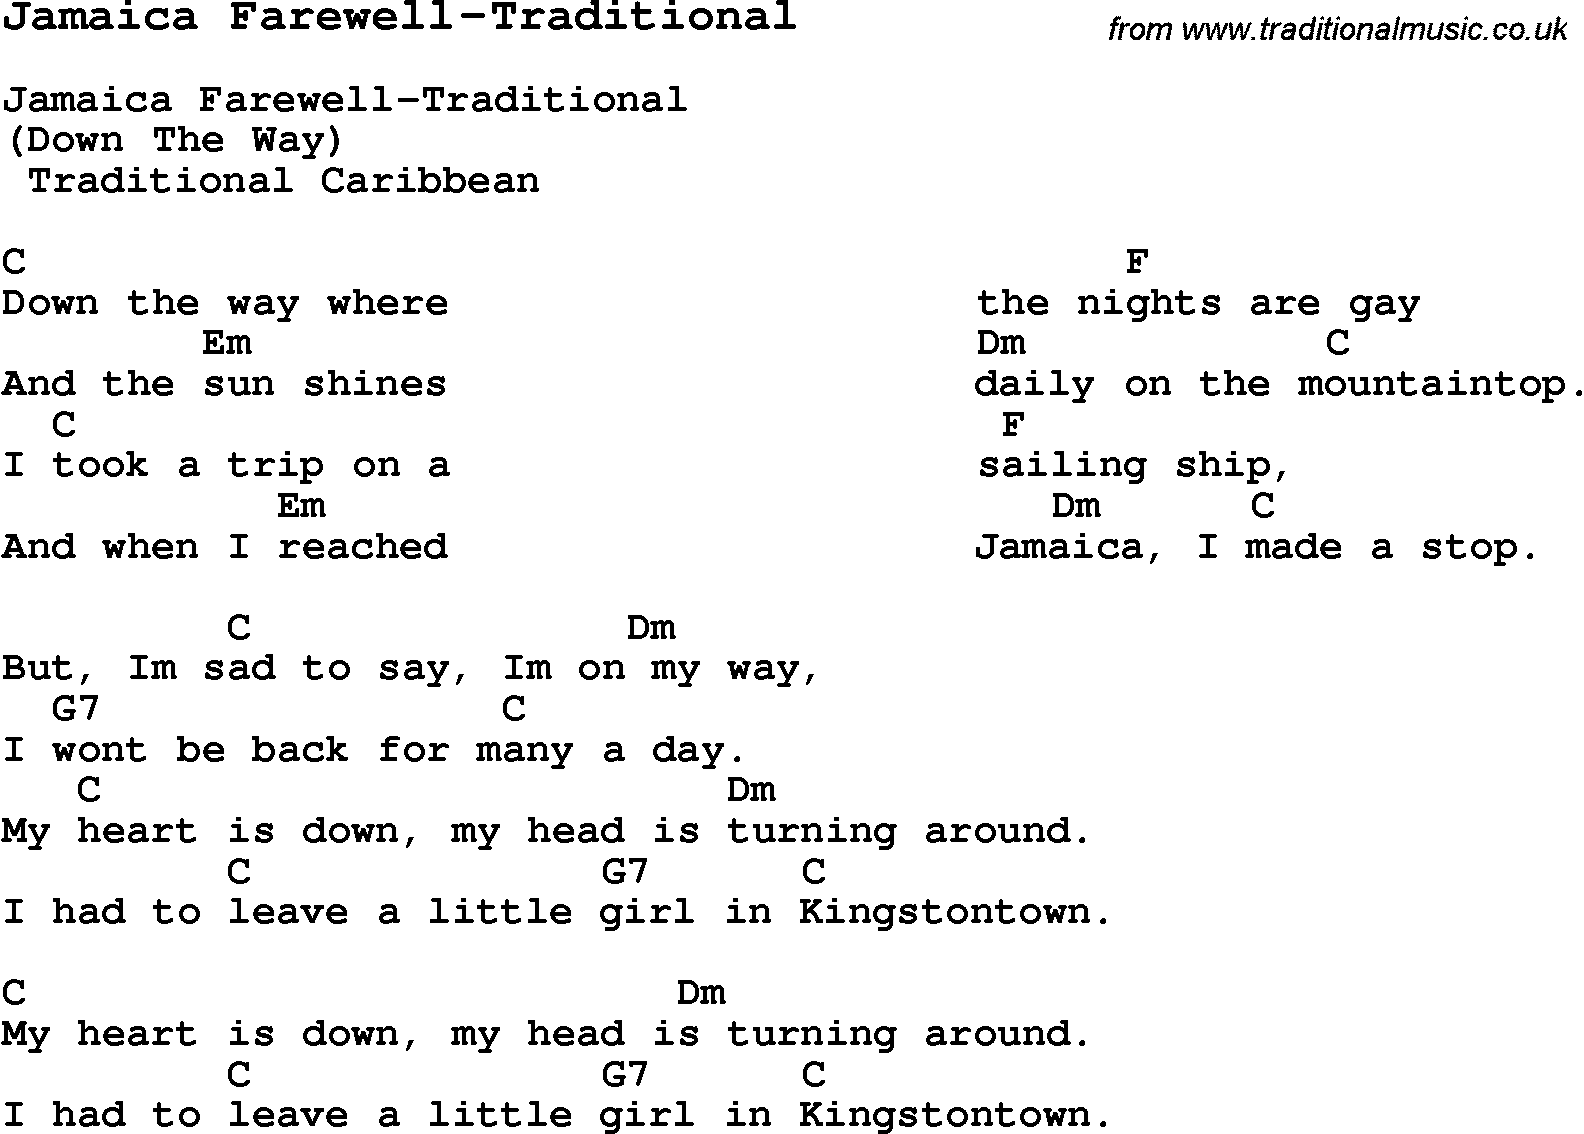 Summer-Camp Song, Jamaica Farewell-Traditional, with lyrics and chords for Ukulele, Guitar Banjo etc.